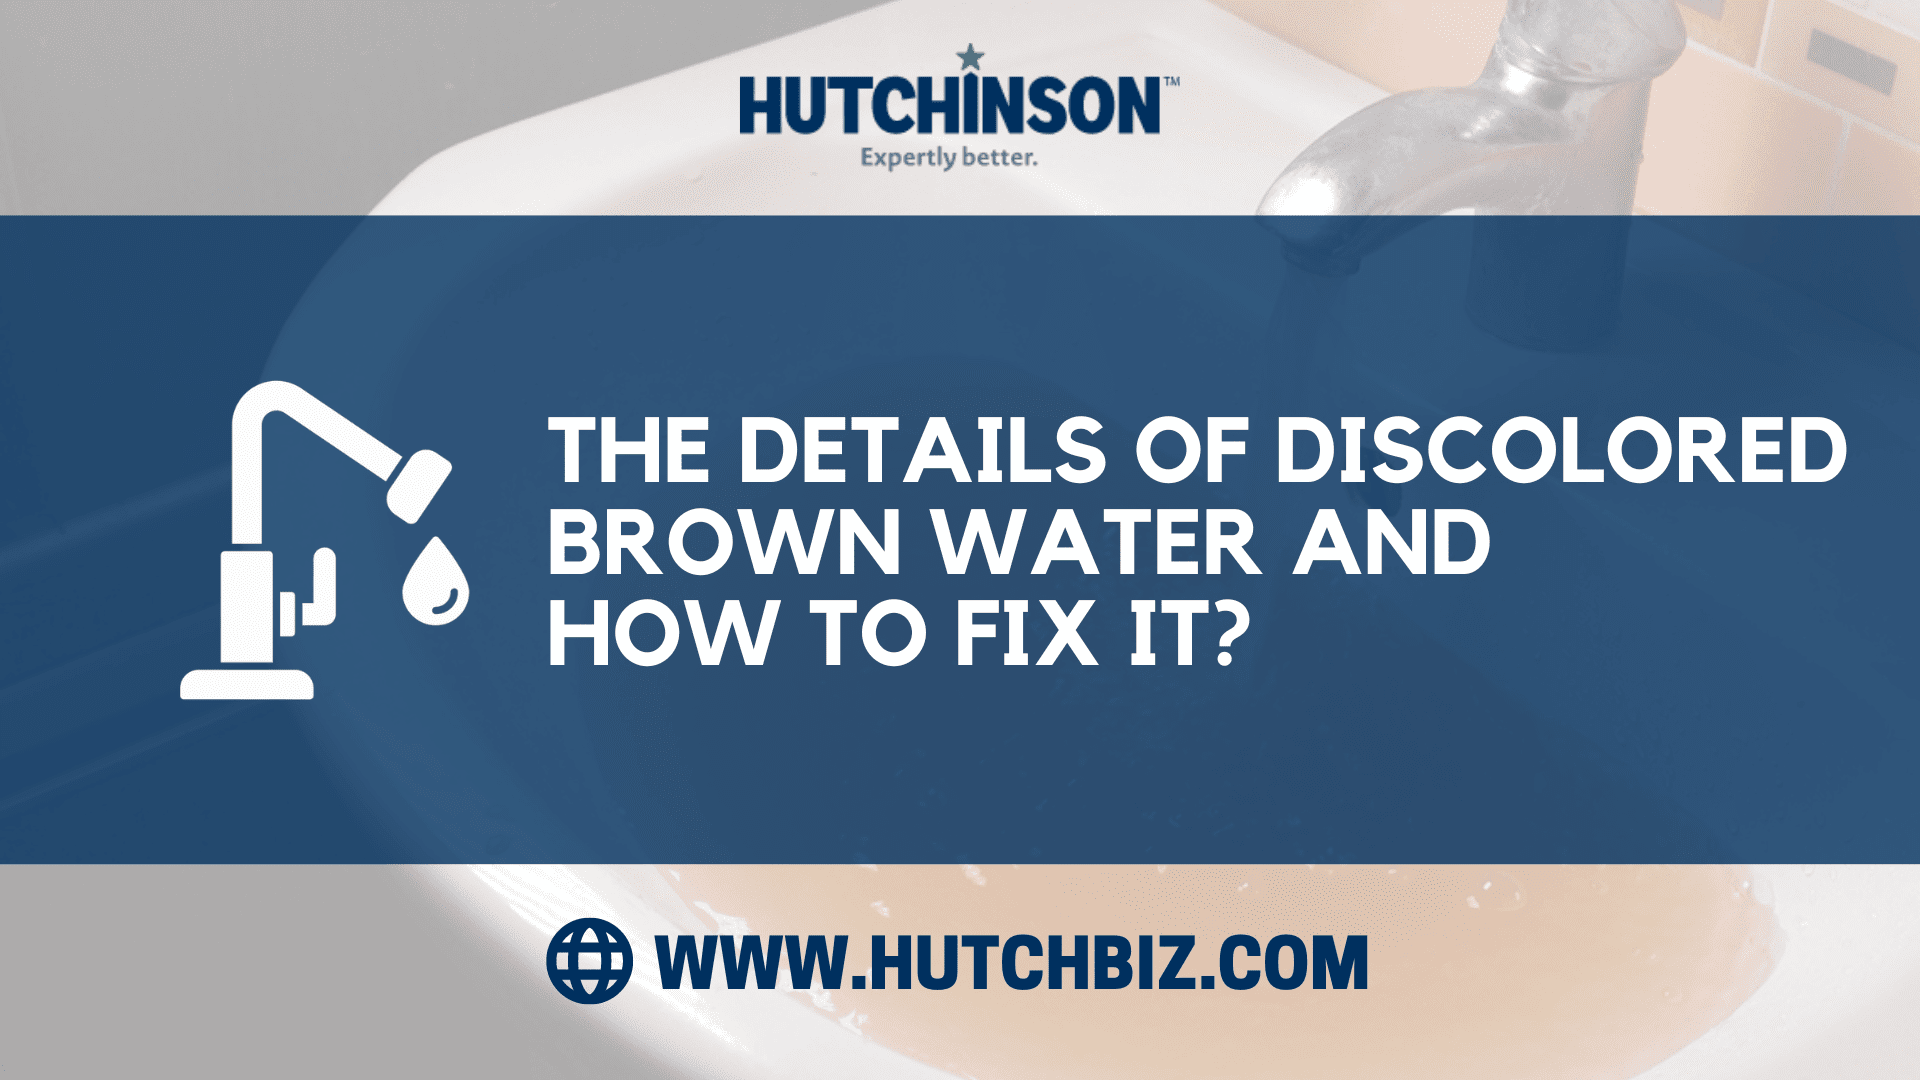 The Details of Discolored Brown Water and How To Fix It